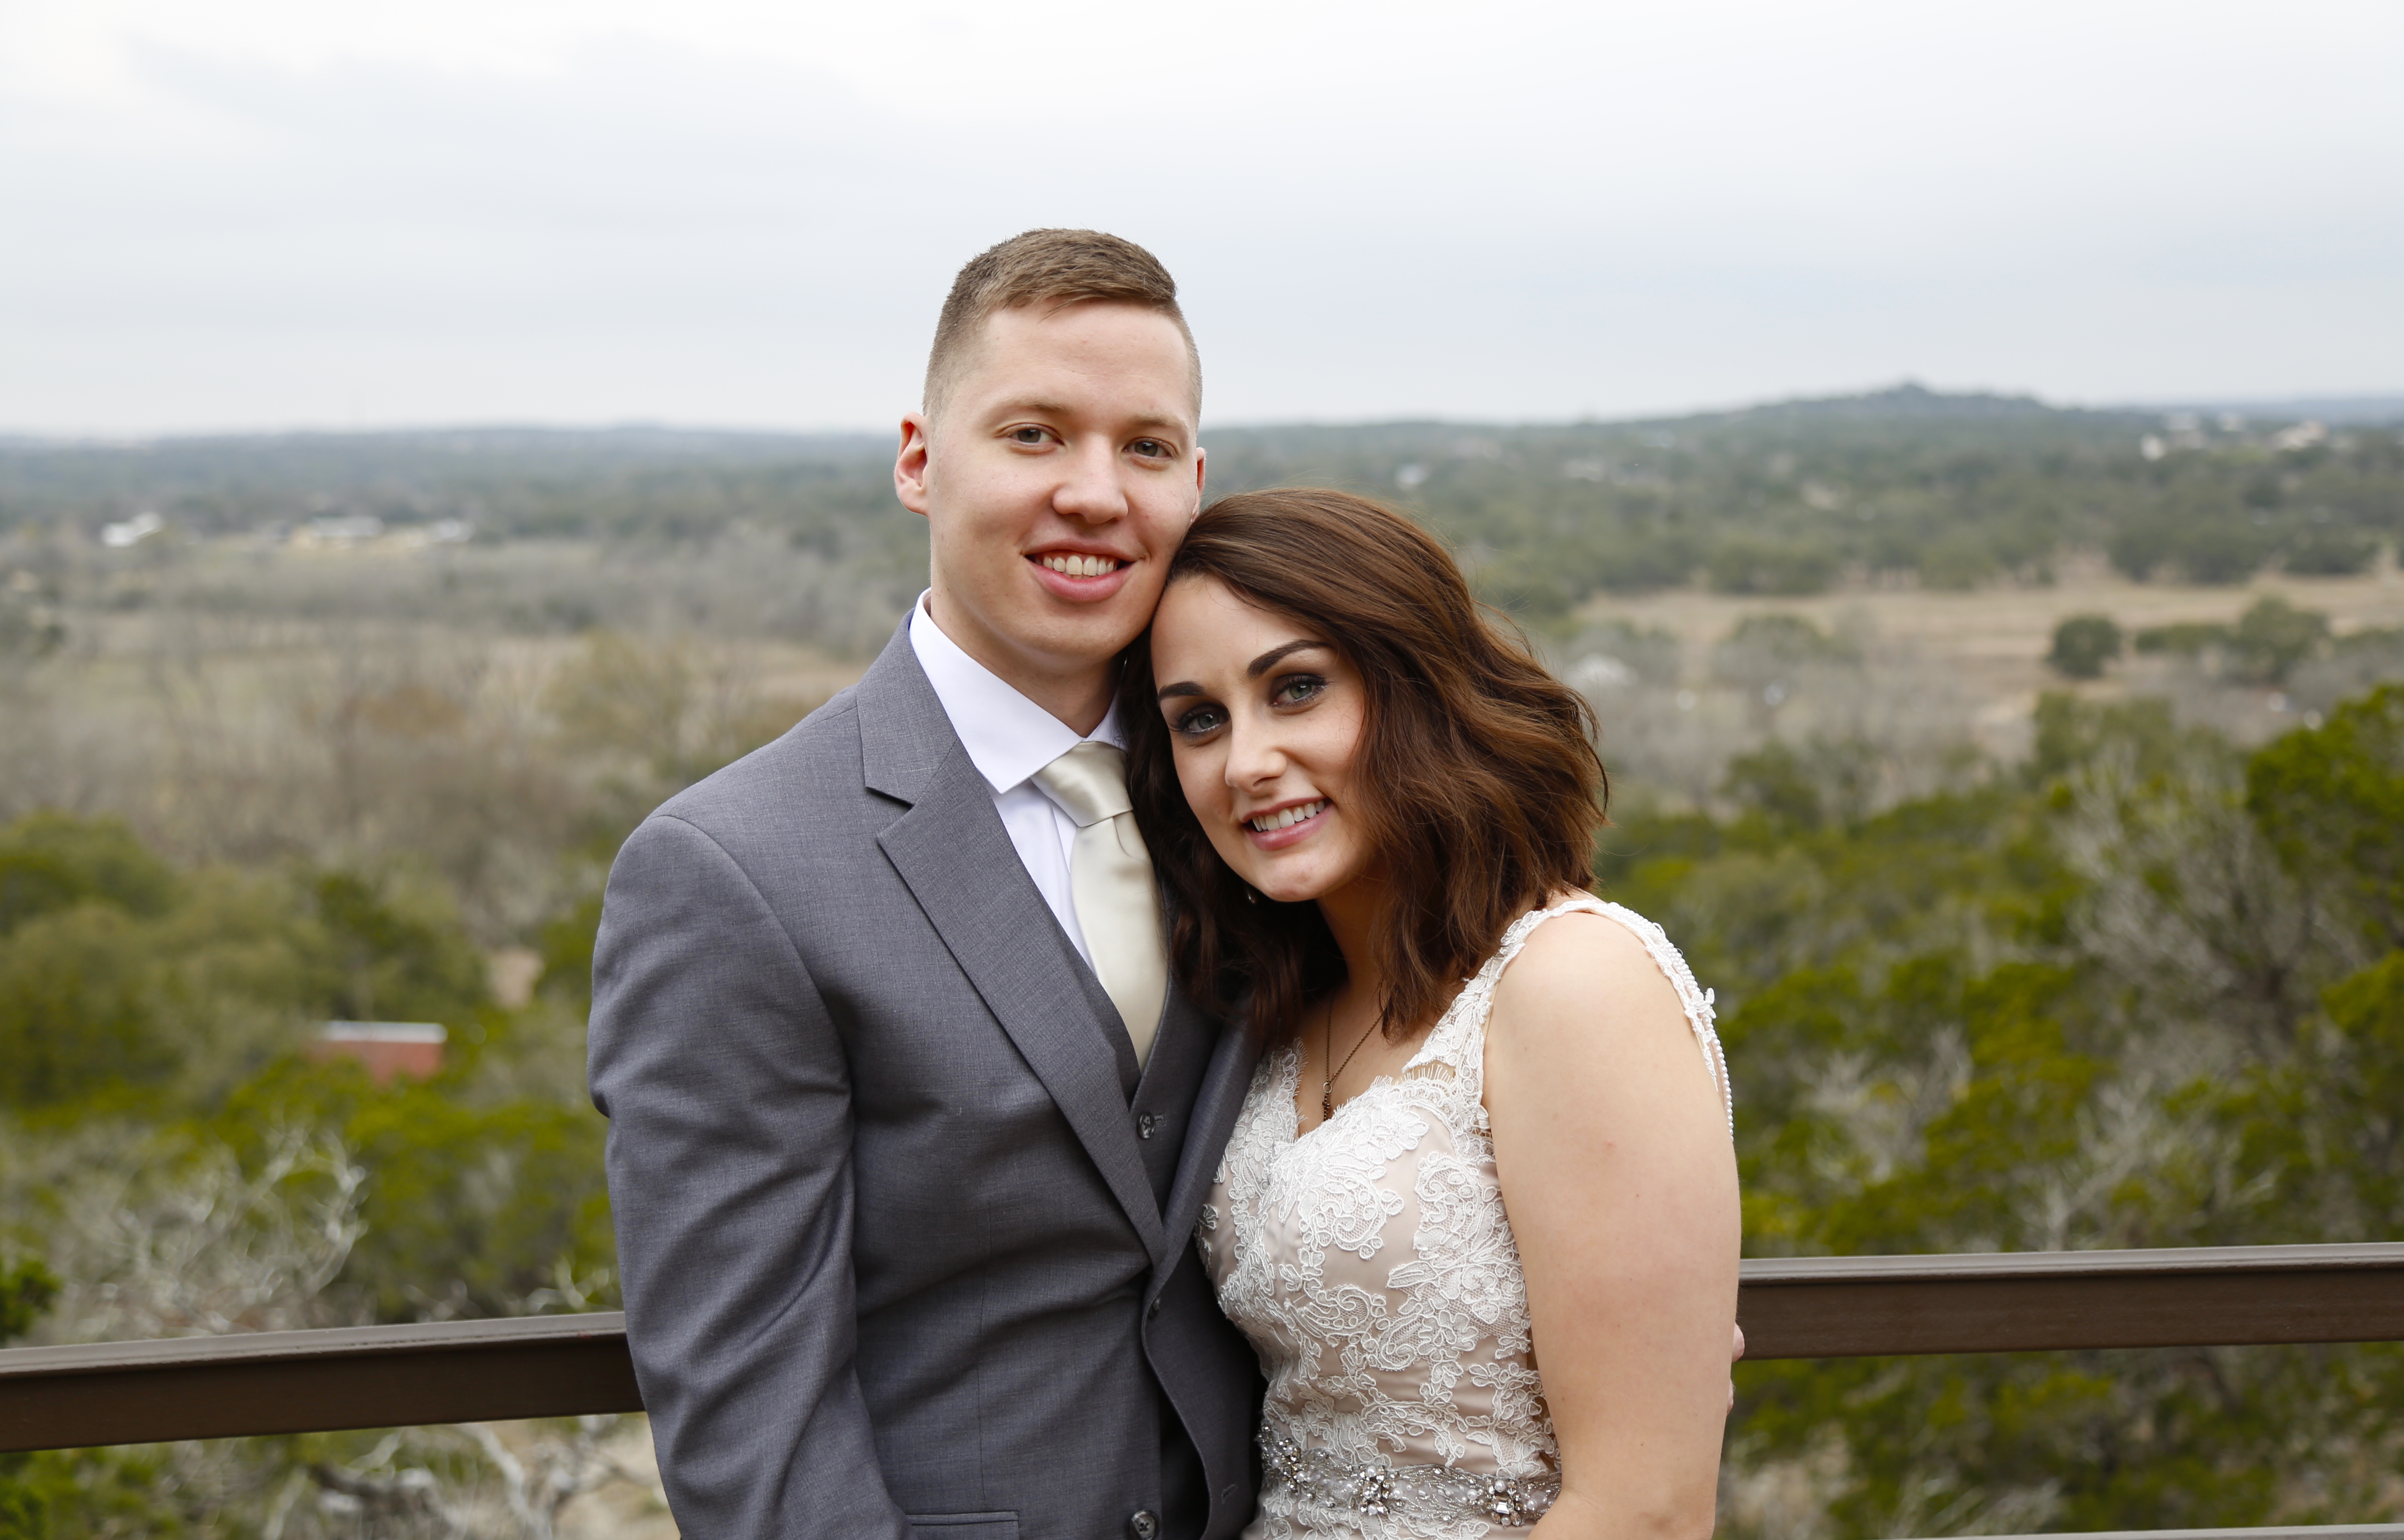 Madalyn & Devon: A Commitment For Life